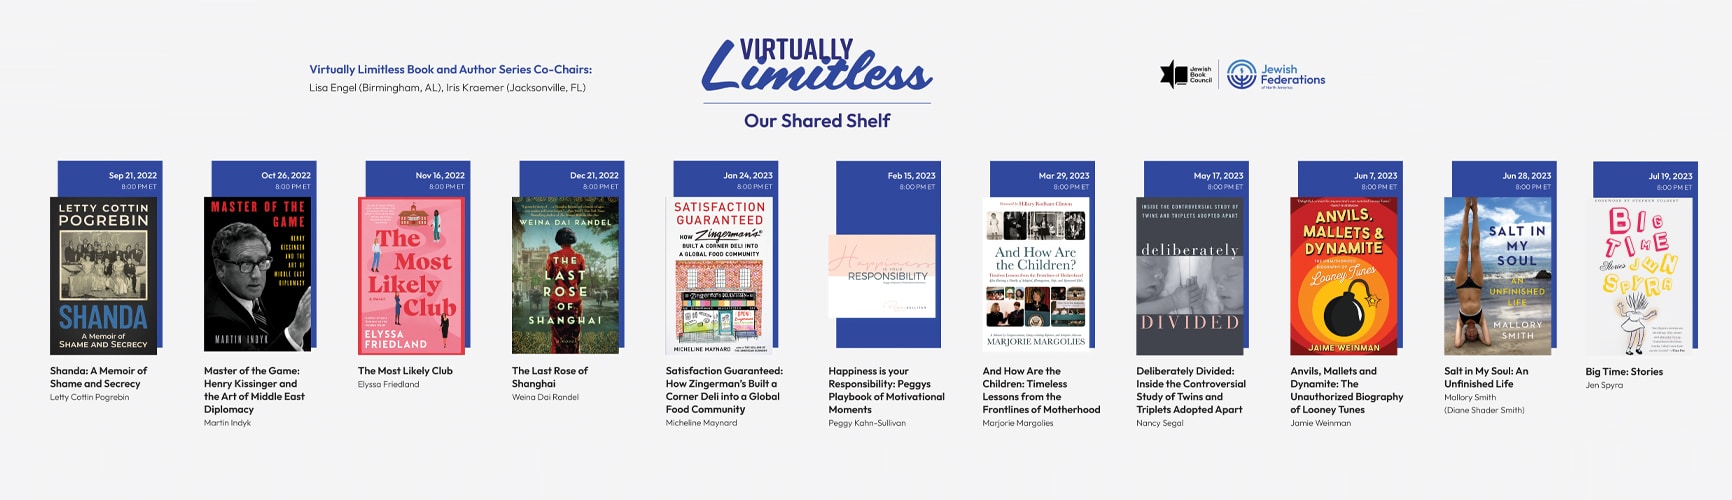 Virtually Limitless: Our Shared Shelf Book and Author Series 2023 - virtually limitless3